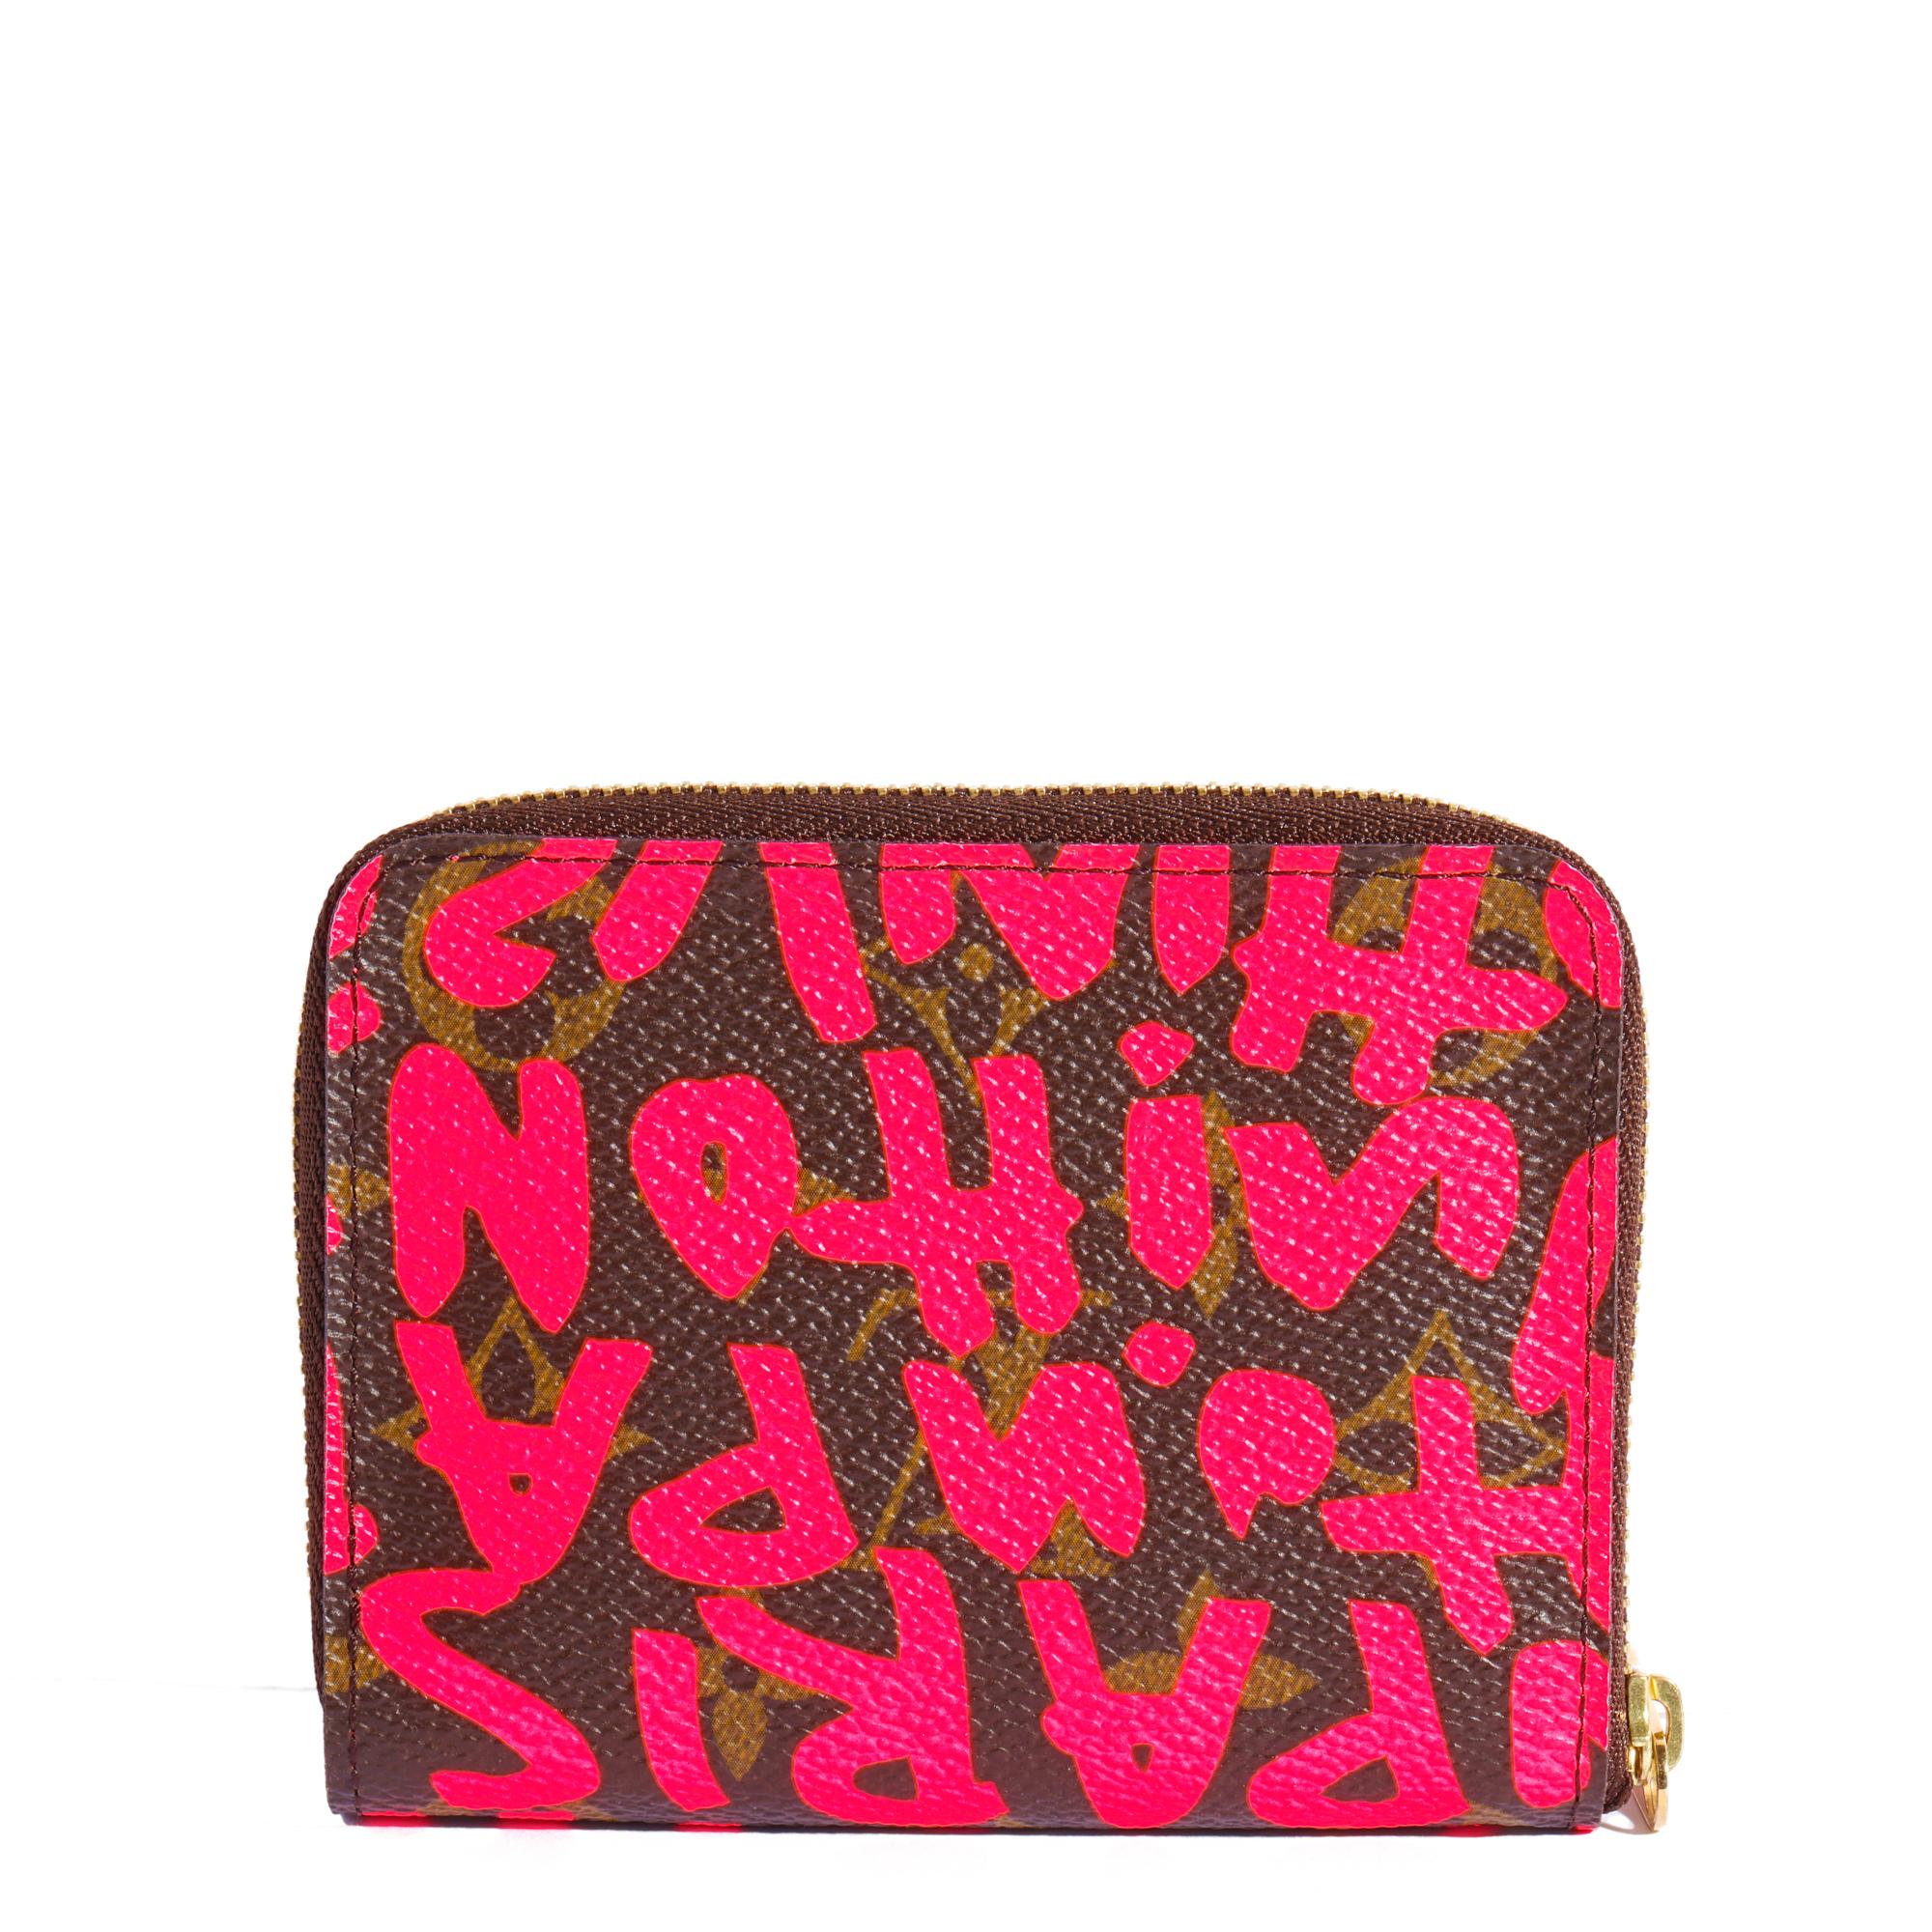 BRAND	Louis Vuitton
MODEL	Stephen Sprouse Compact Wallet
AGE	2012
GENDER	Women's
MATERIAL(S)	Coated Canvas
COLOUR	Multicolour
BRAND COLOUR	Brown, Neon Pink
HARDWARE	Gold
INTERIOR	Pink Leather
ACCOMPANIED BY	Louis Vuitton Dust